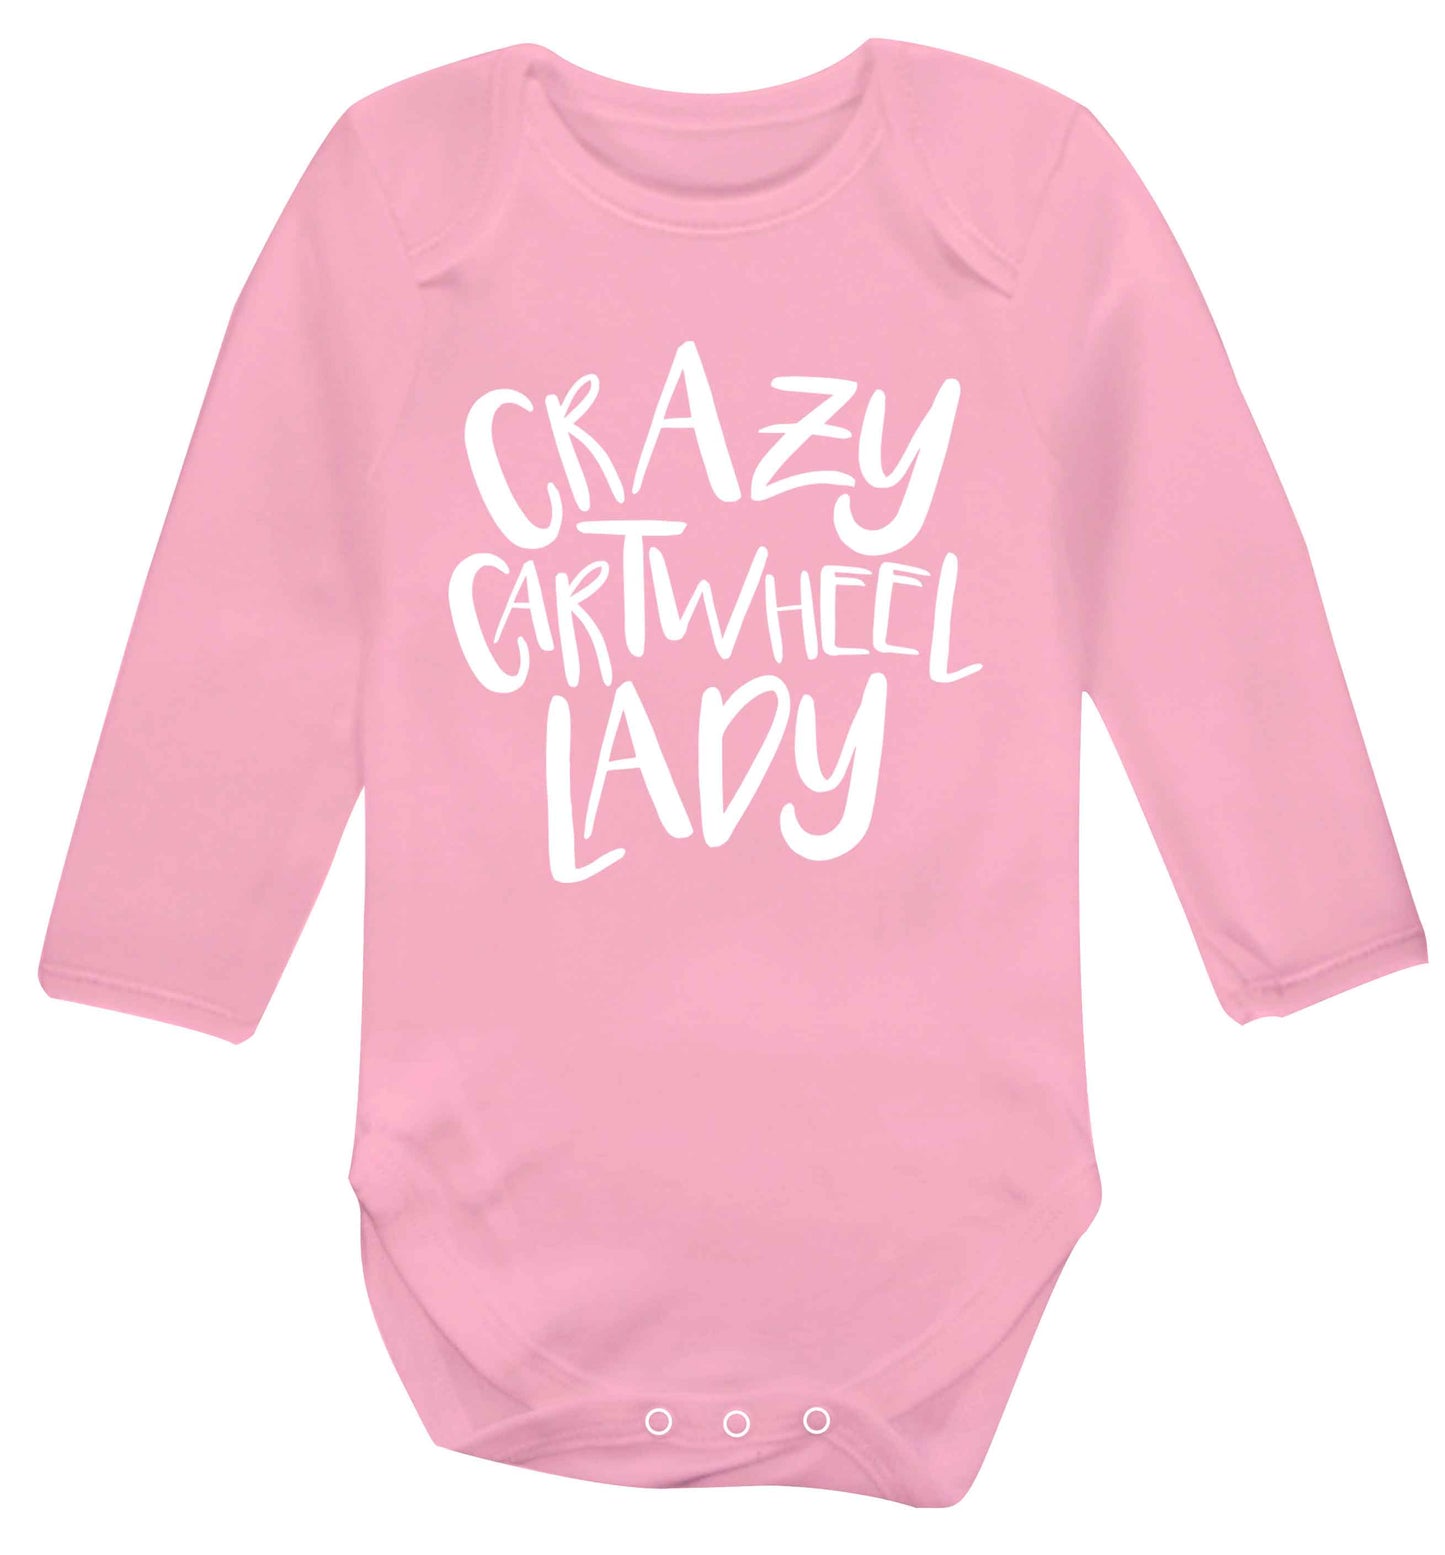 Crazy cartwheel lady Baby Vest long sleeved pale pink 6-12 months